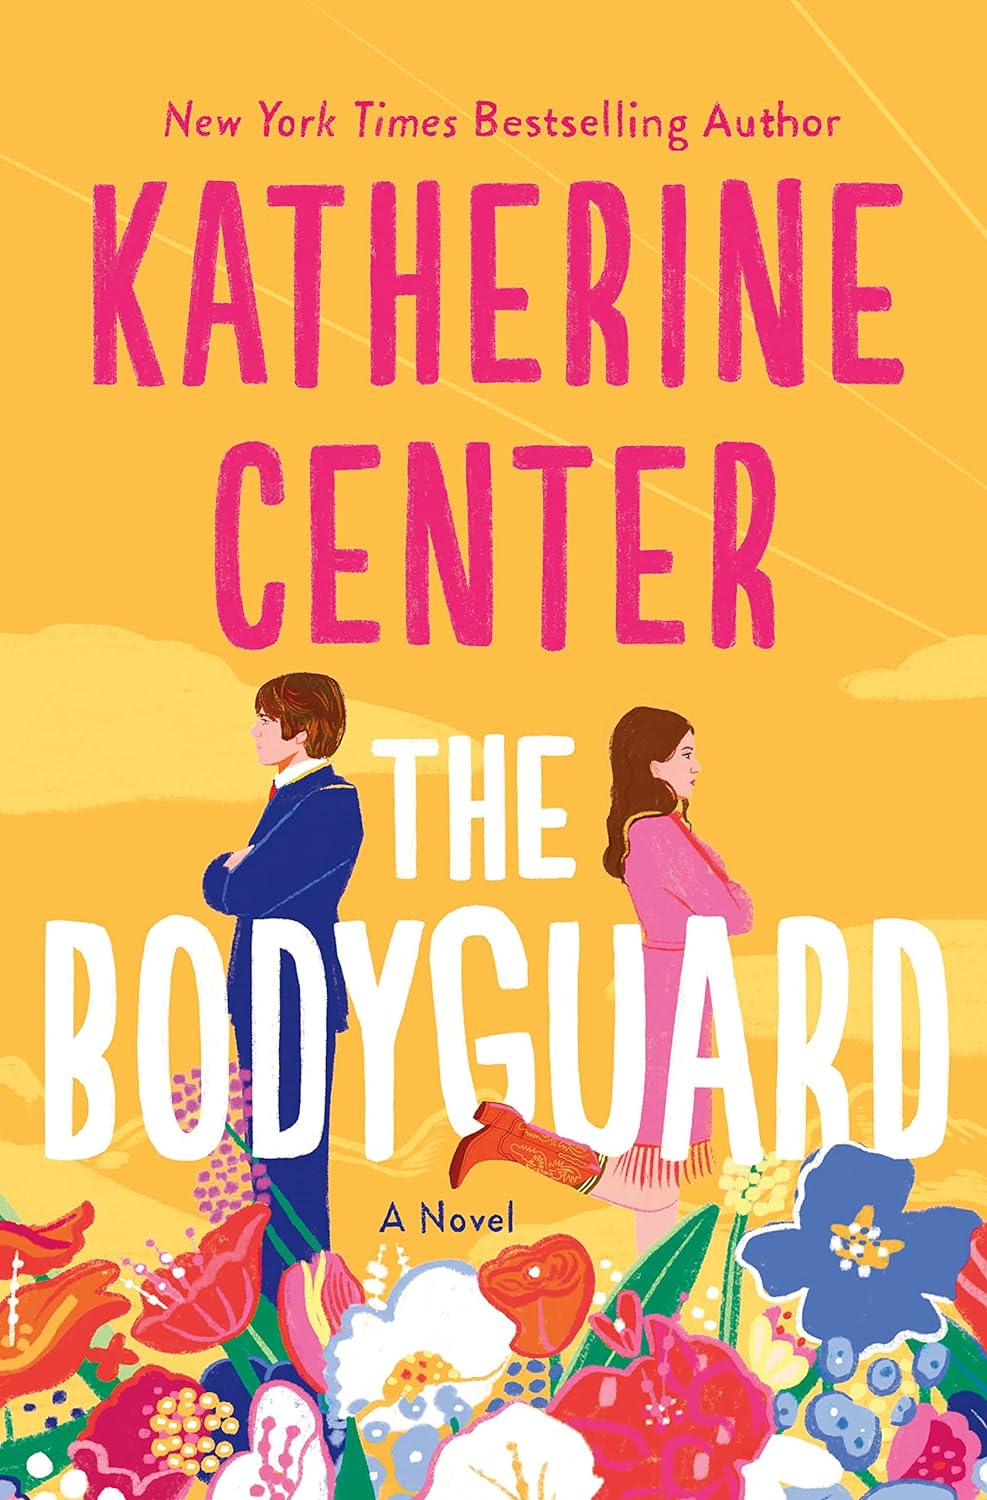 The Bodyguard - by Katherine Center (Hardcover)